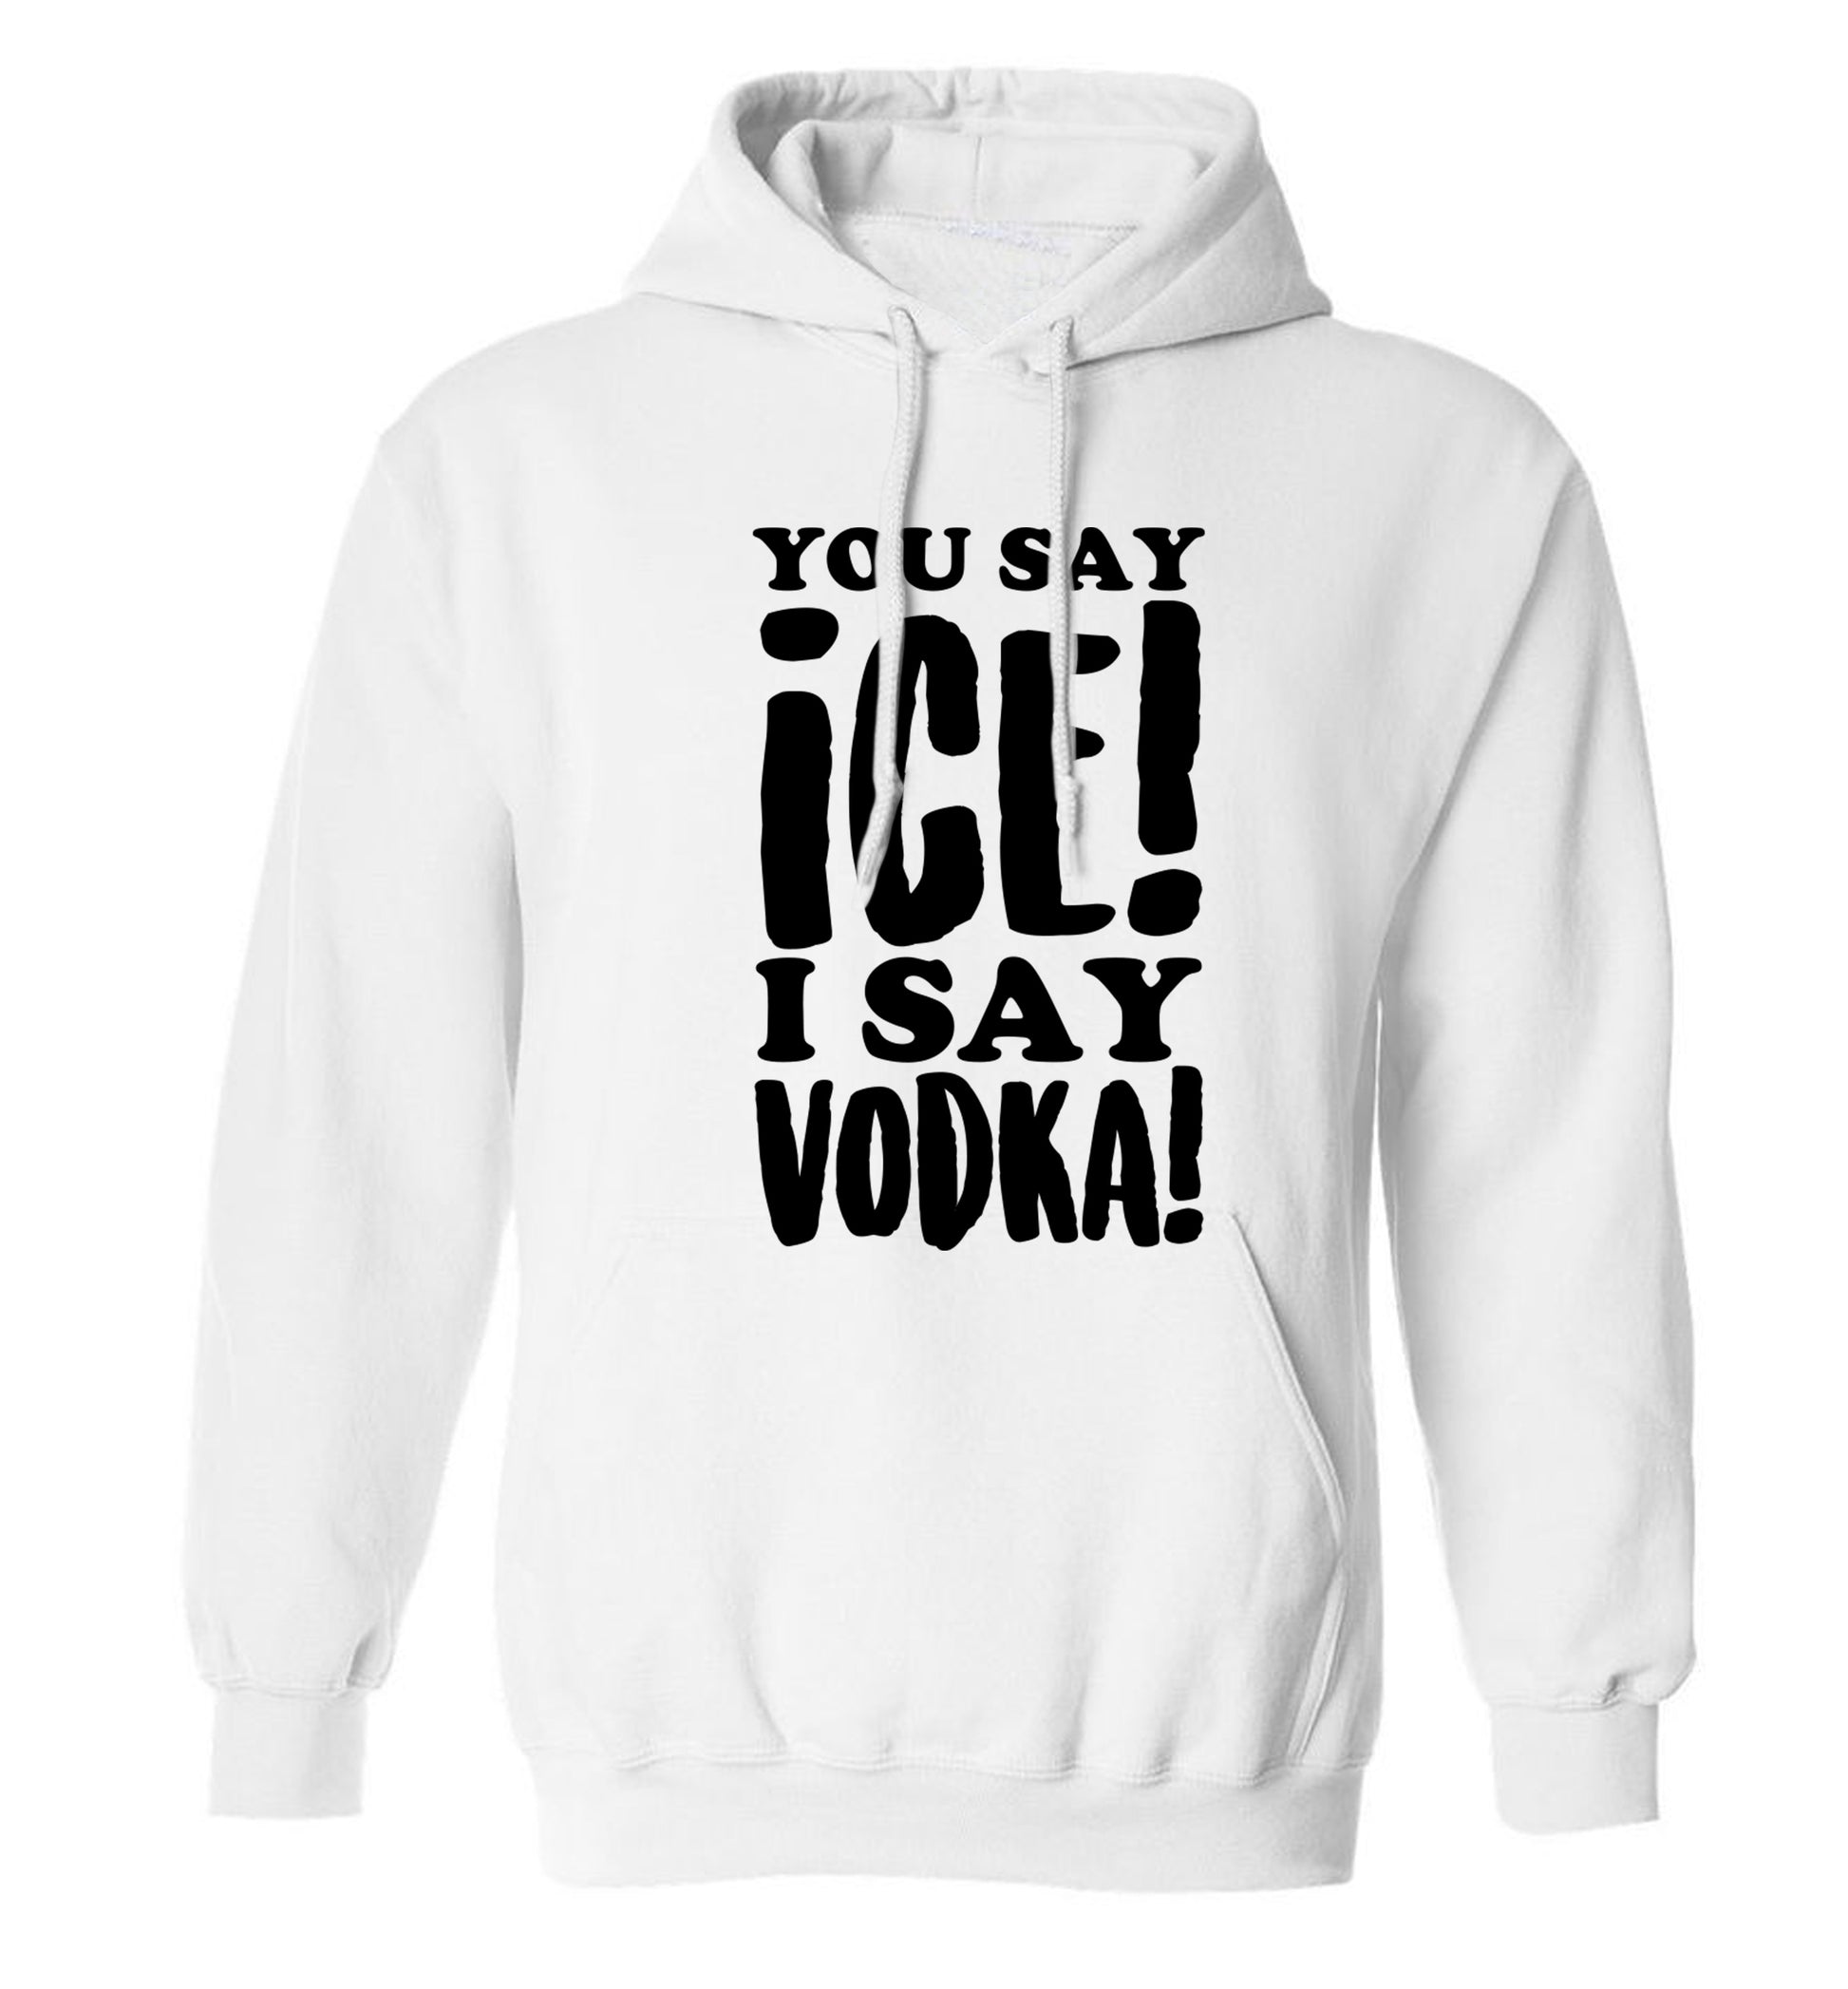 You say ice I say vodka! adults unisex white hoodie 2XL